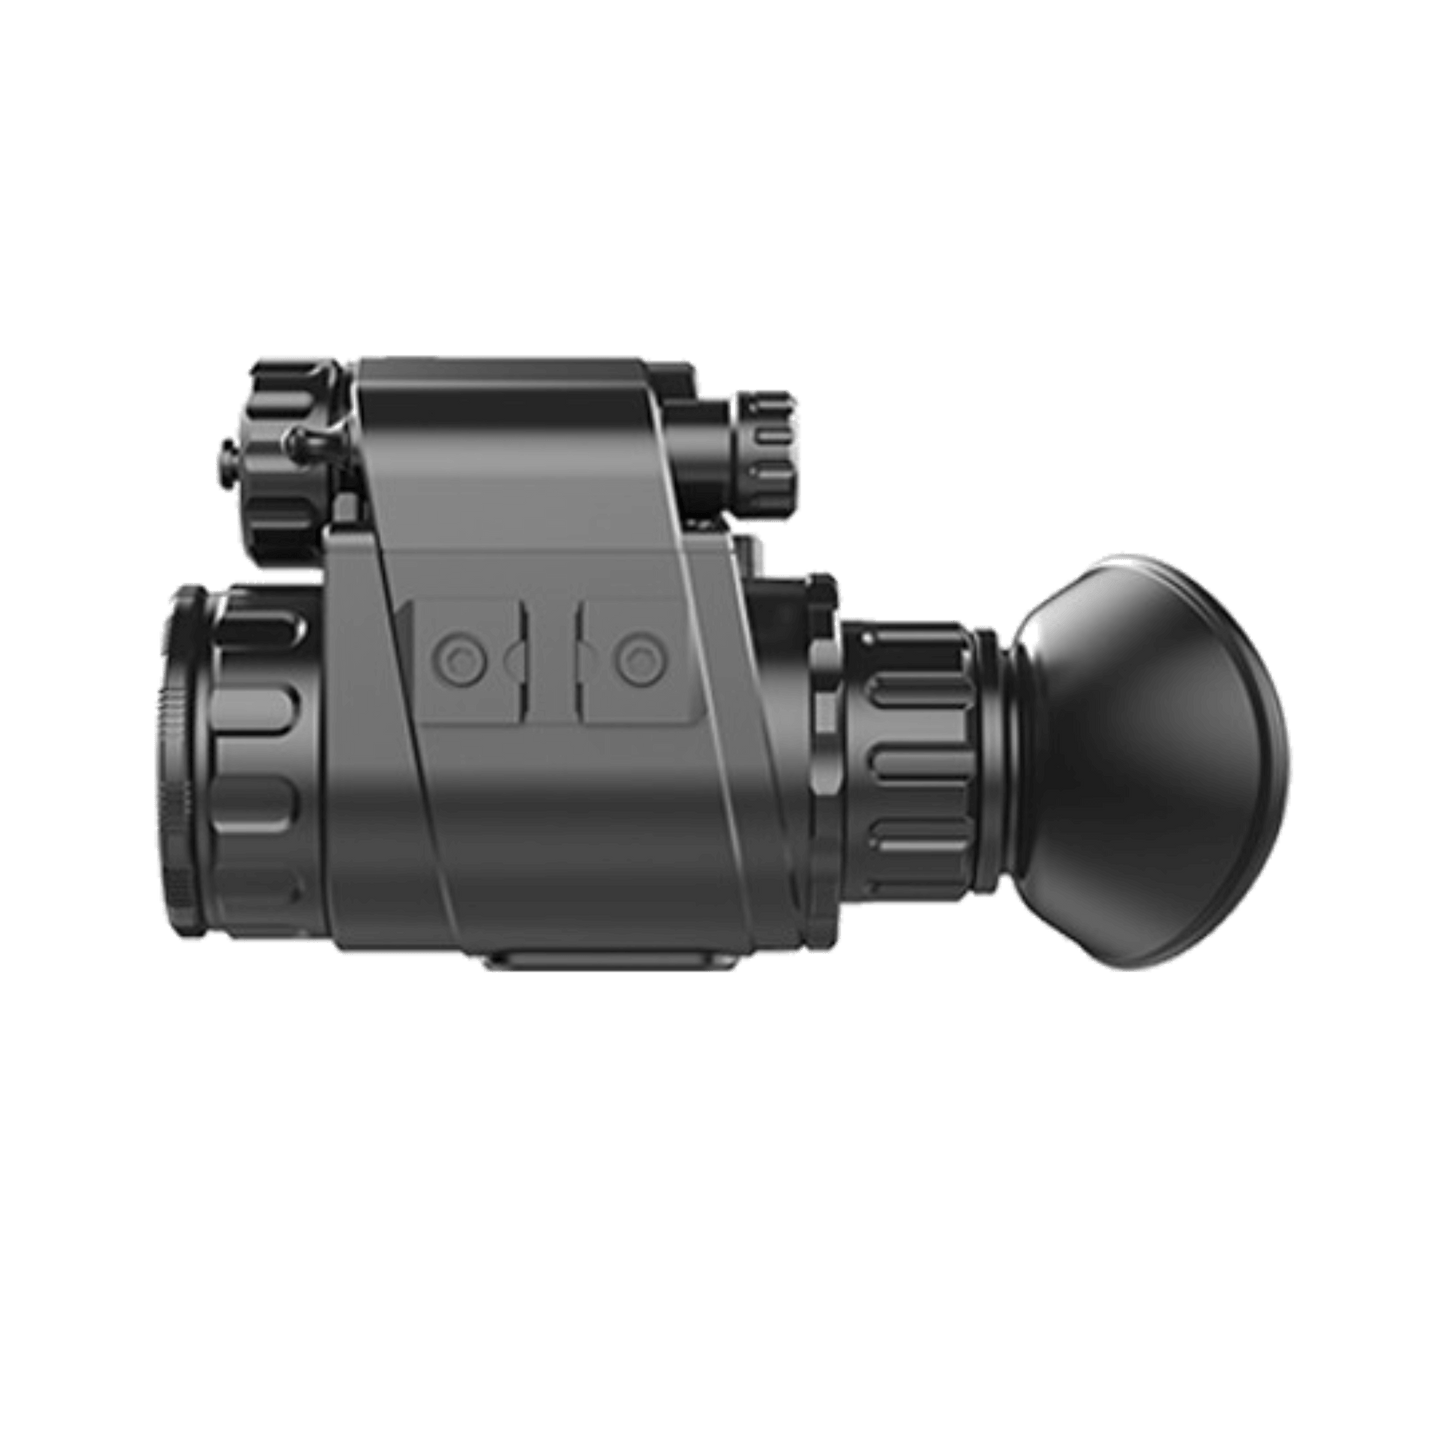 Infiray Mini Series MH25 Handheld and helment mount thermal Imaging monocular - Infiray MH25 TTCW-MH25 side view